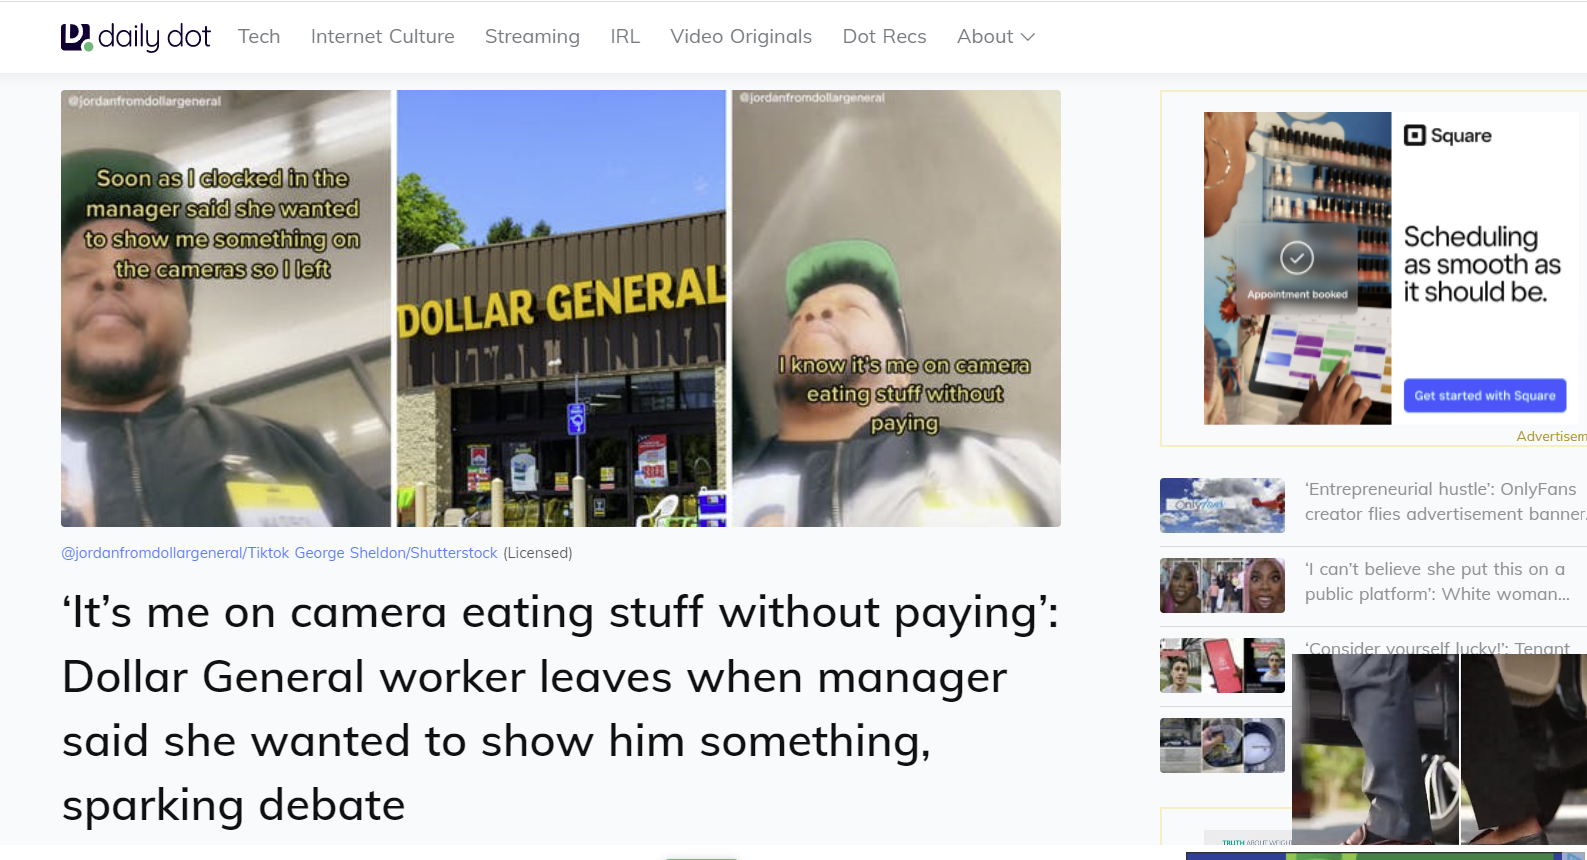 George Sheldon Image Illustrates Article about Dollar General Employee Eating Unpaid Food